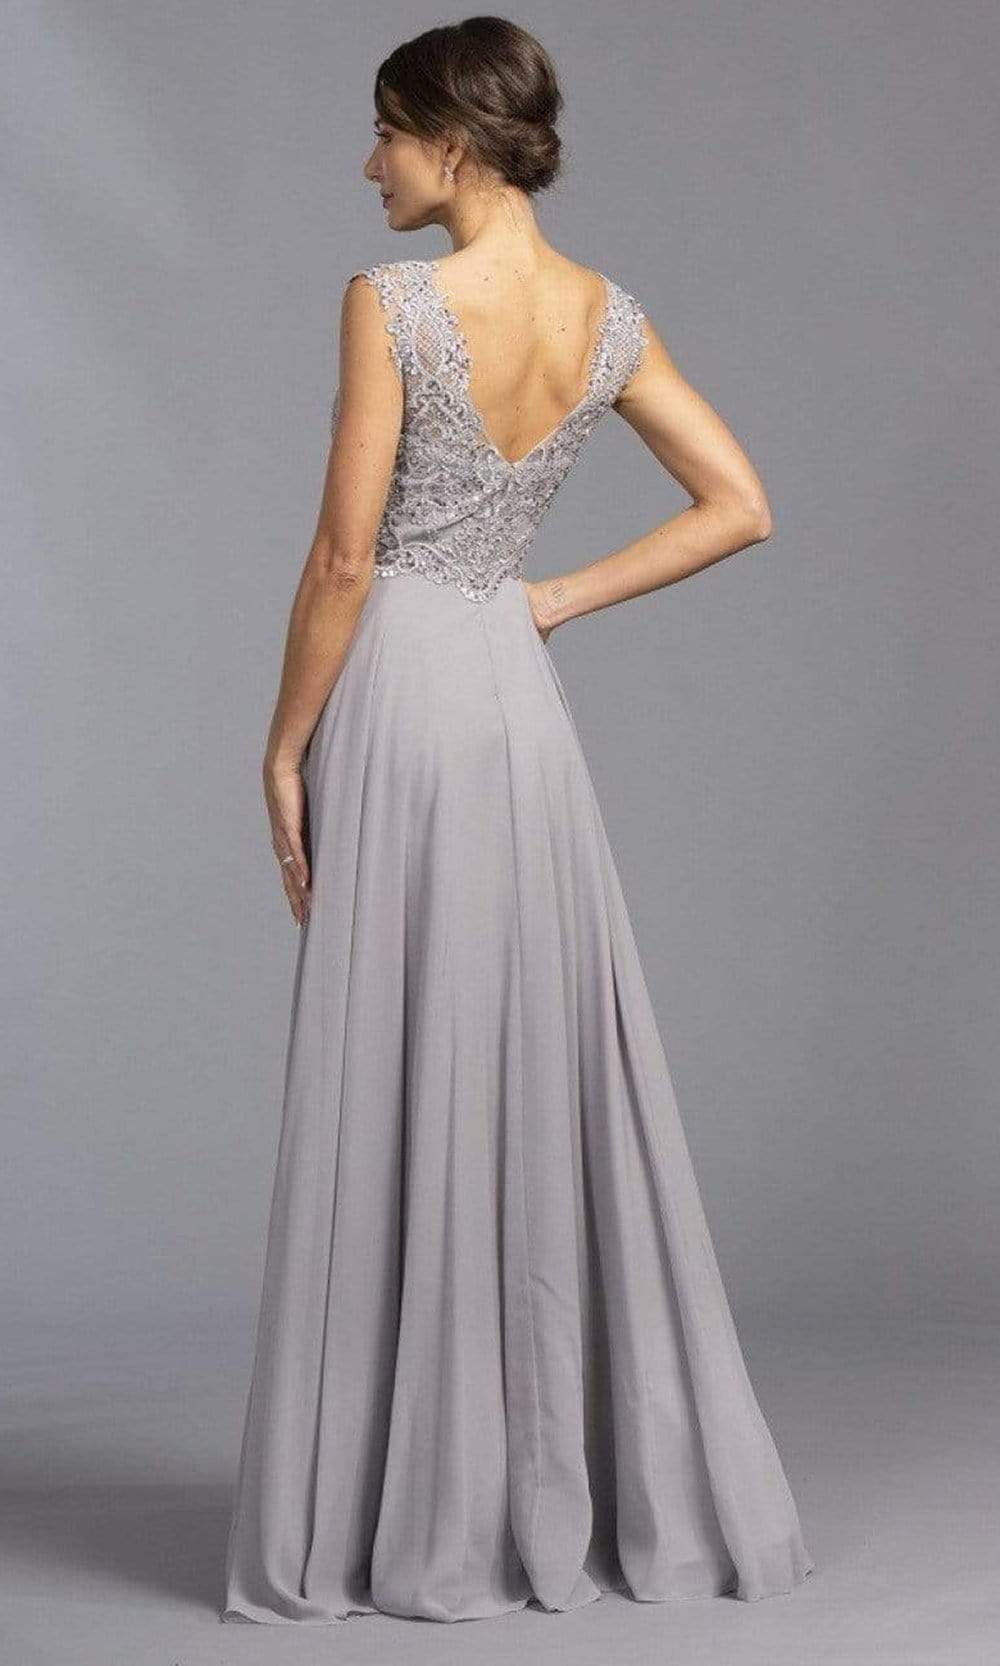 Aspeed Design - M2341 Sleeveless Embroidered A-Line Gown Evening Dressses